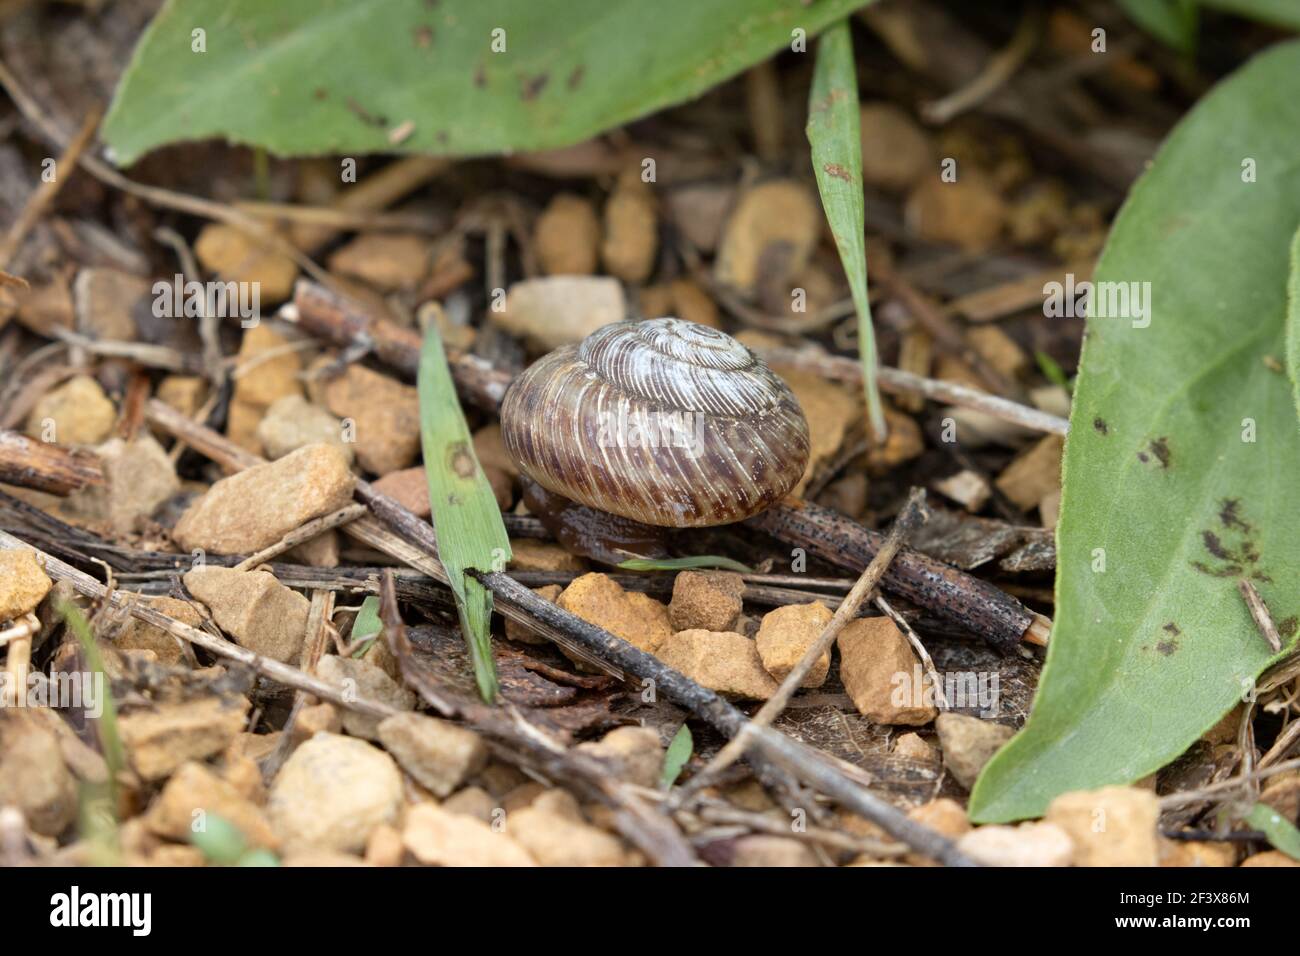 Discus Snail May 24th, 2020 Good Earth State Park, South Dakota Stock Photo